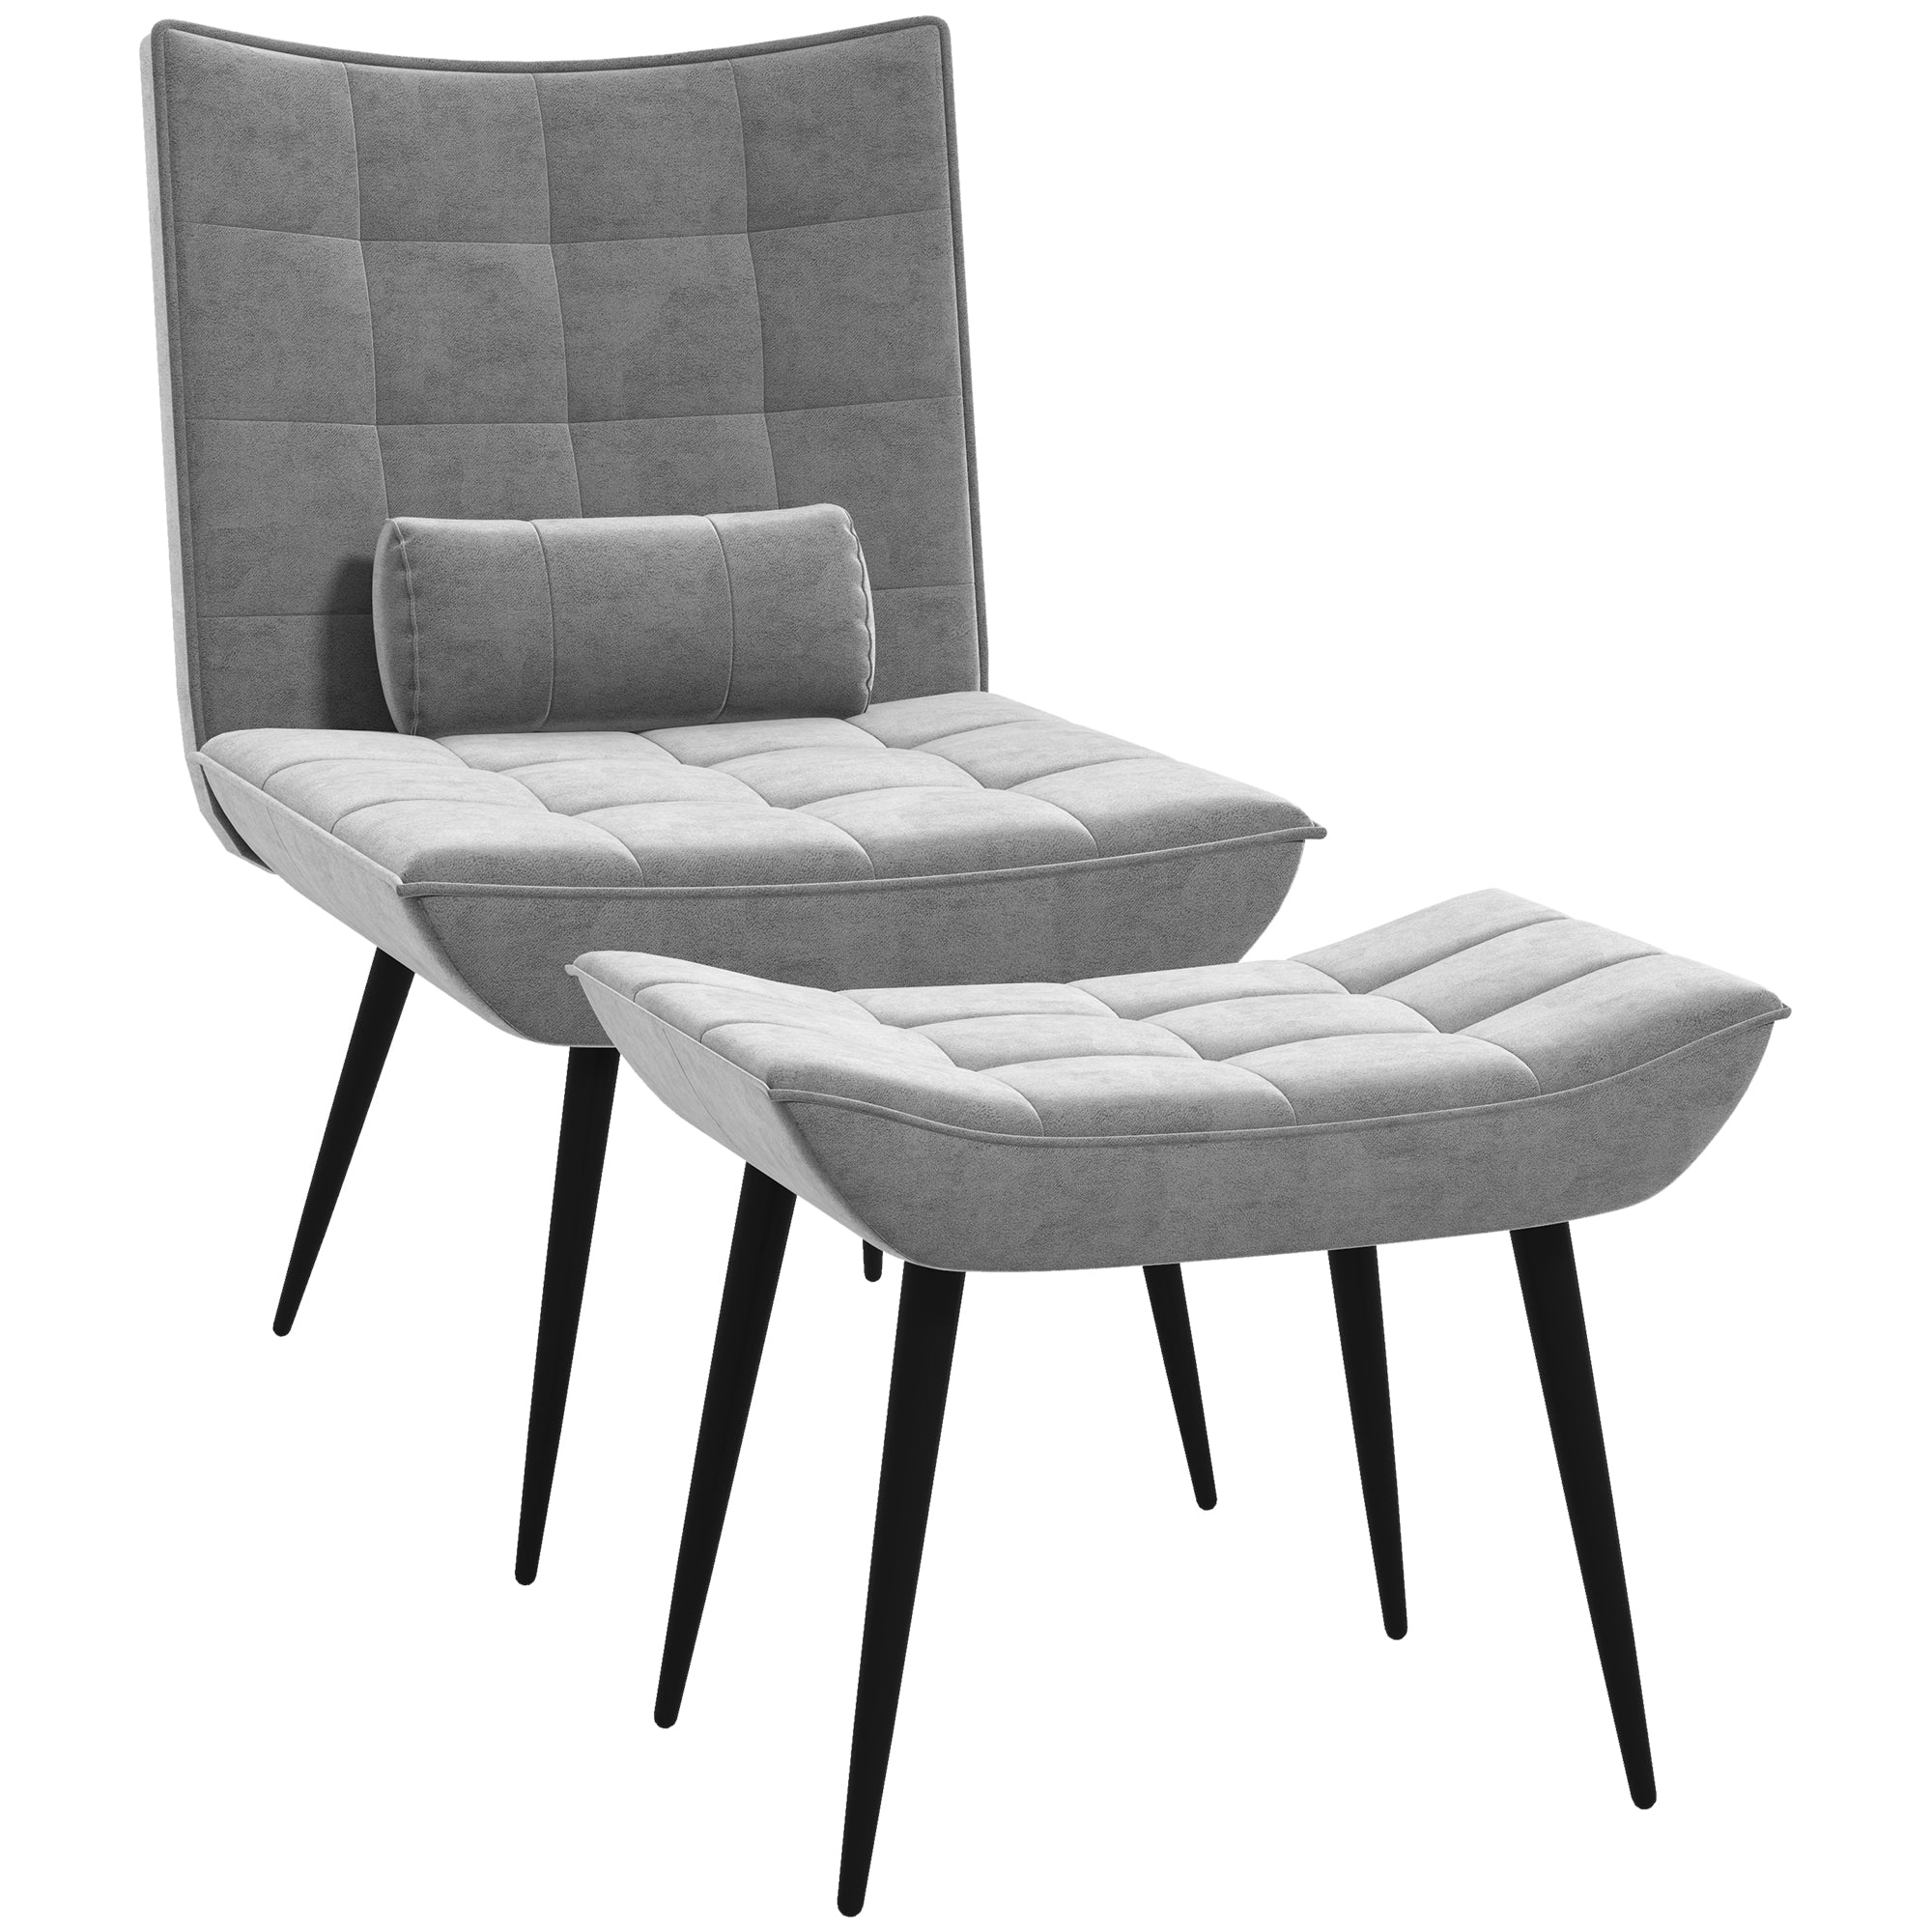 HOMCOM Armless Accent Chair w/ Footstool Set, Modern Tufted Upholstered Lounge Chair w/ Pillow, Steel Legs, Grey - TovaHaus